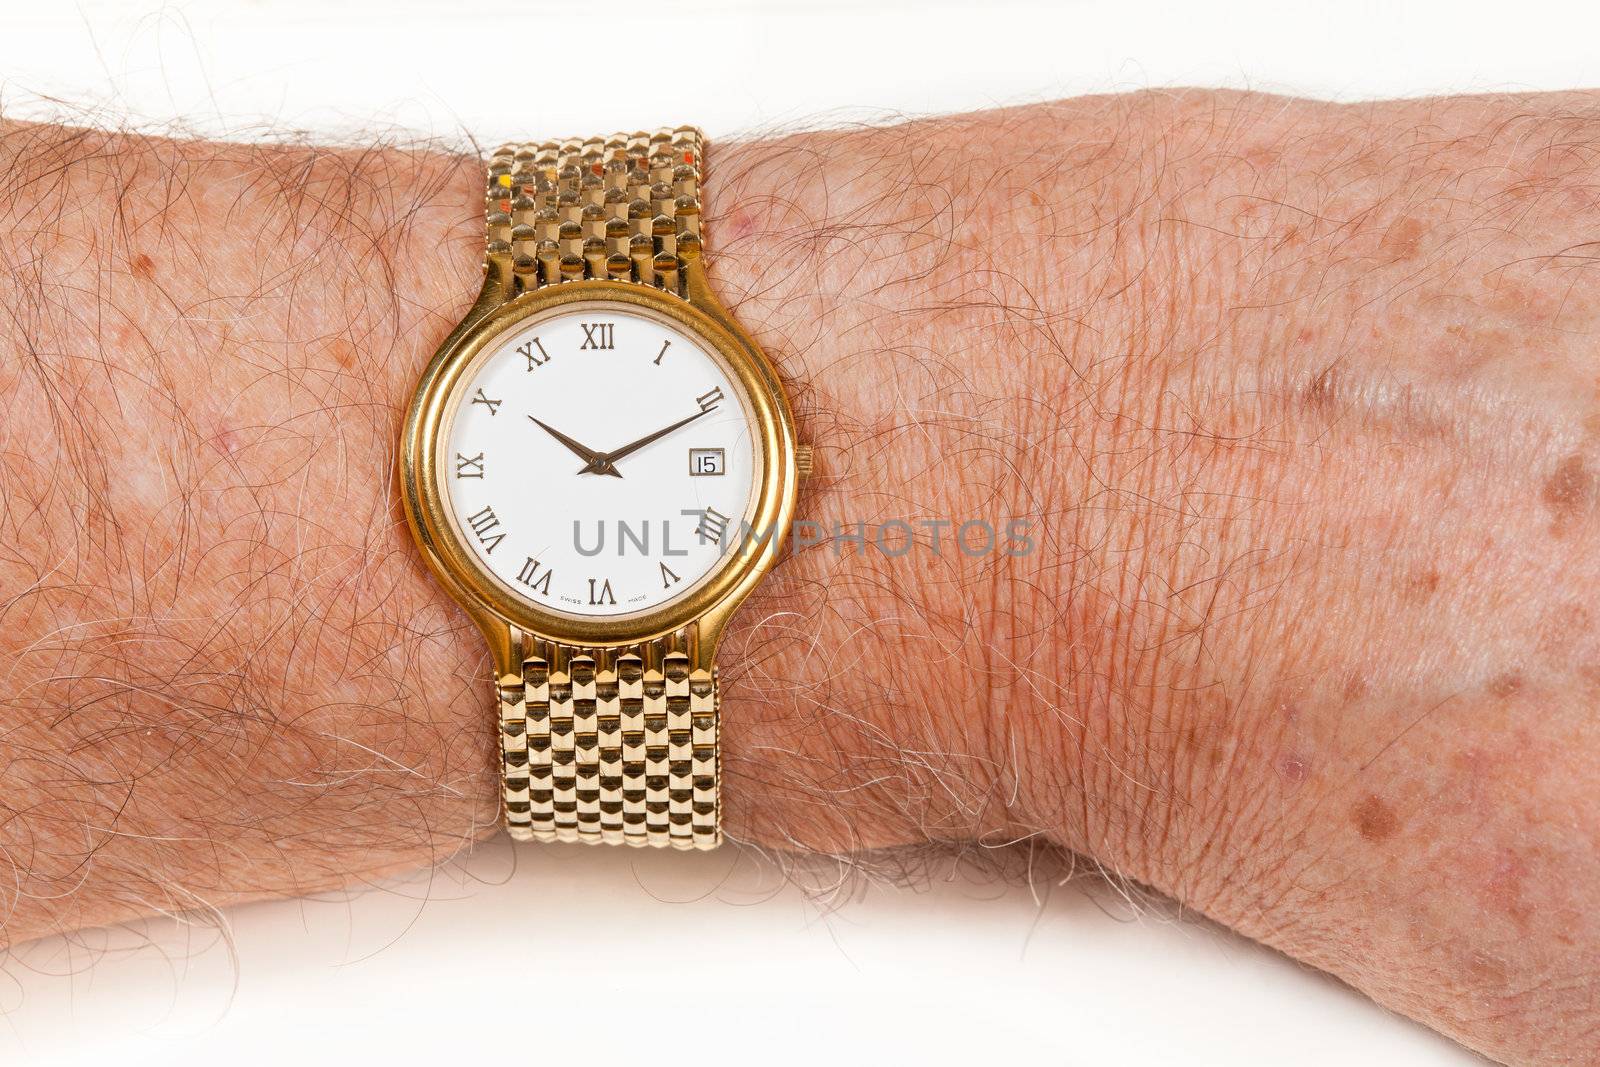 Gold watch with white face on hairy wrist by steheap